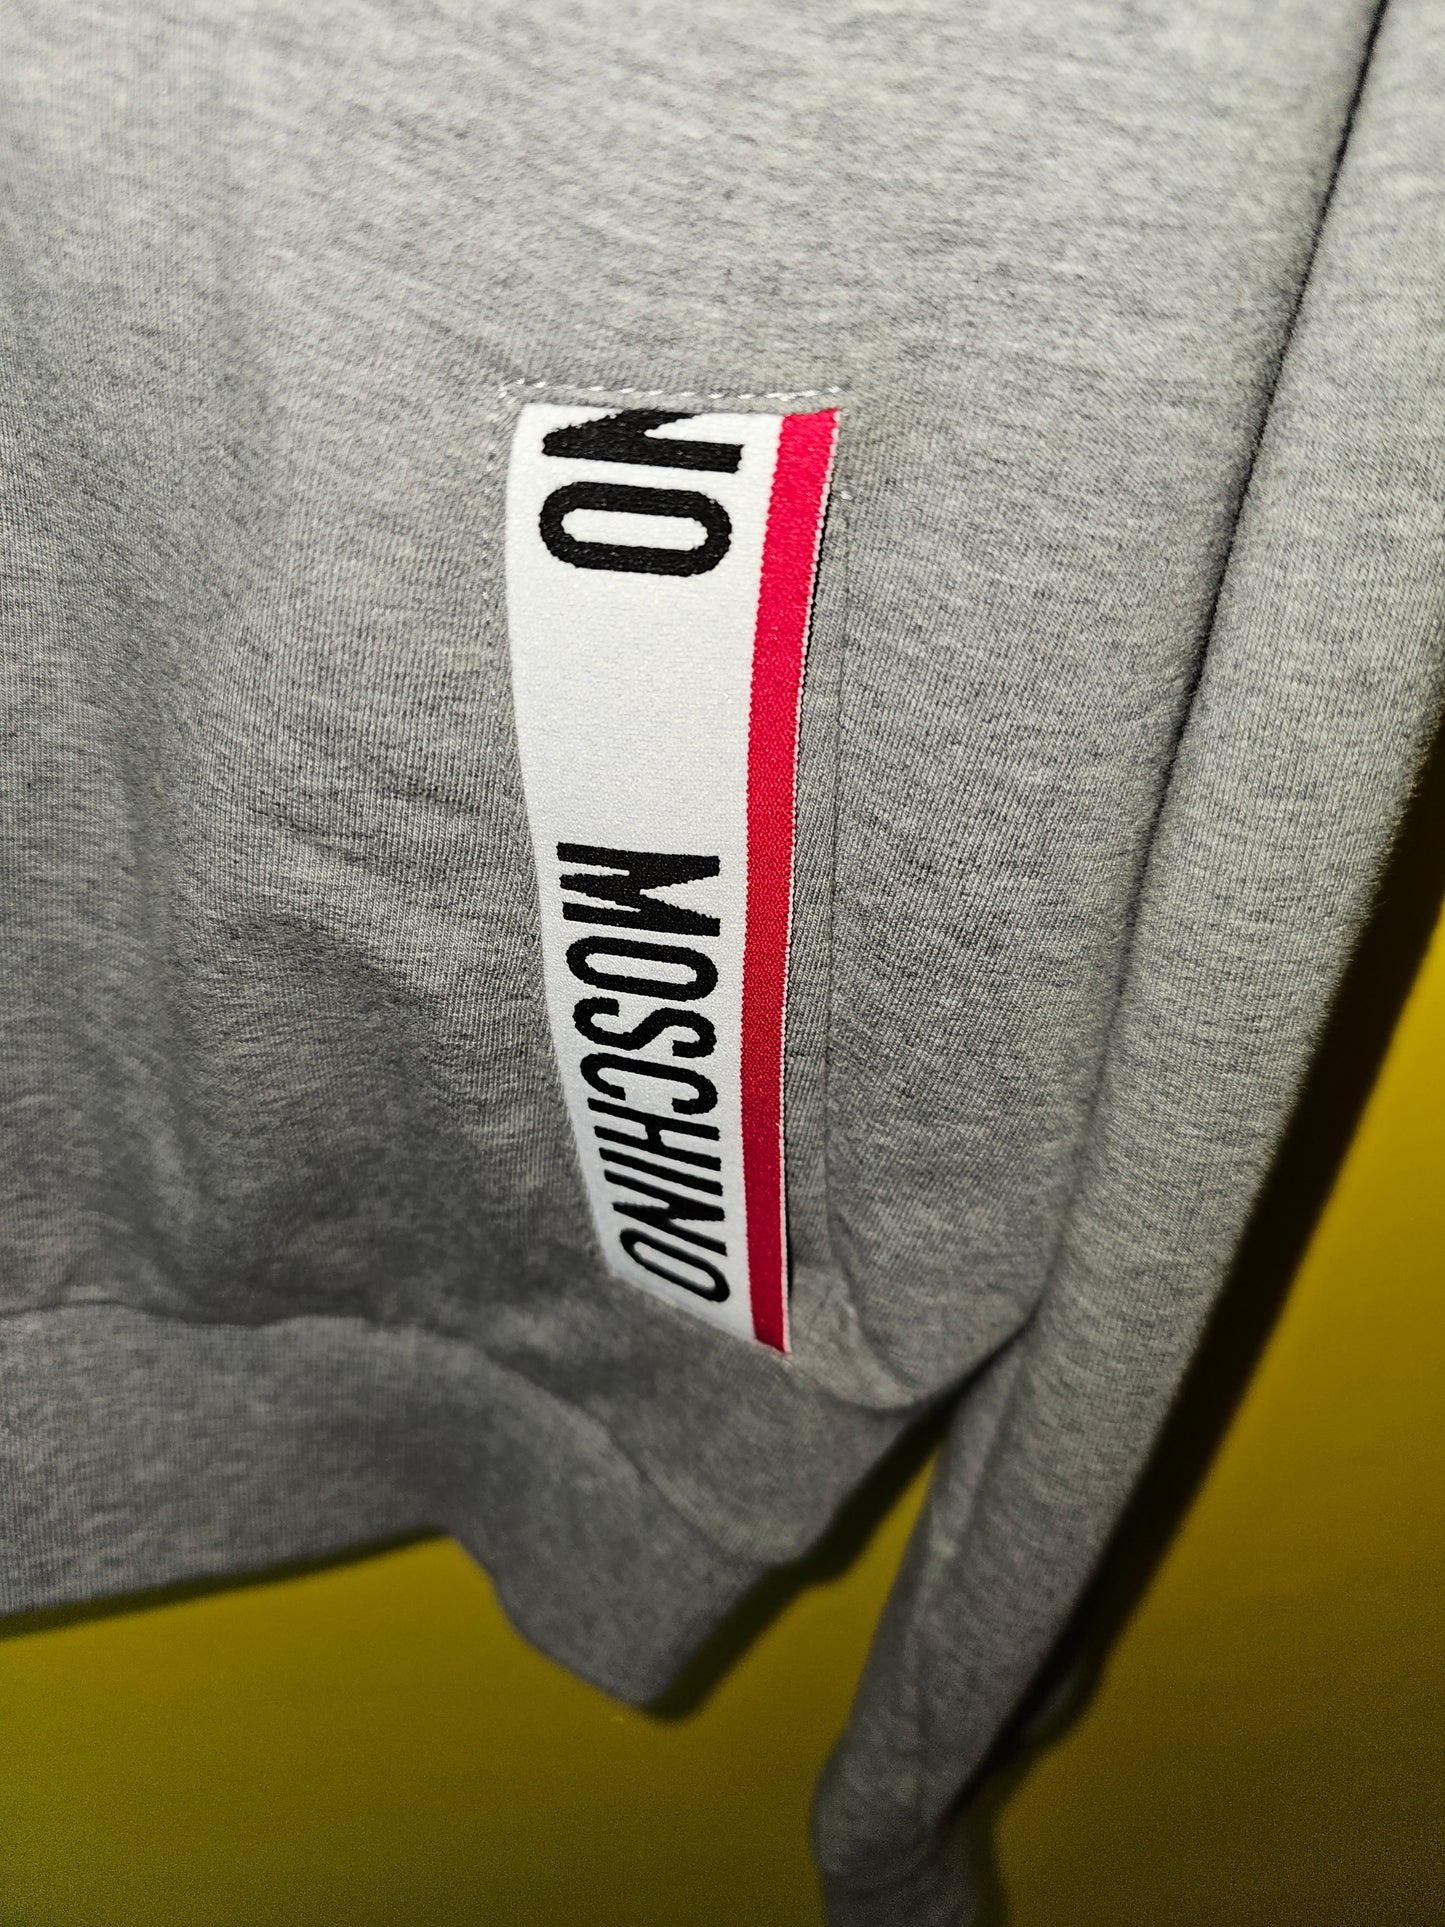 Moschino Grey Hooded Top (XL)